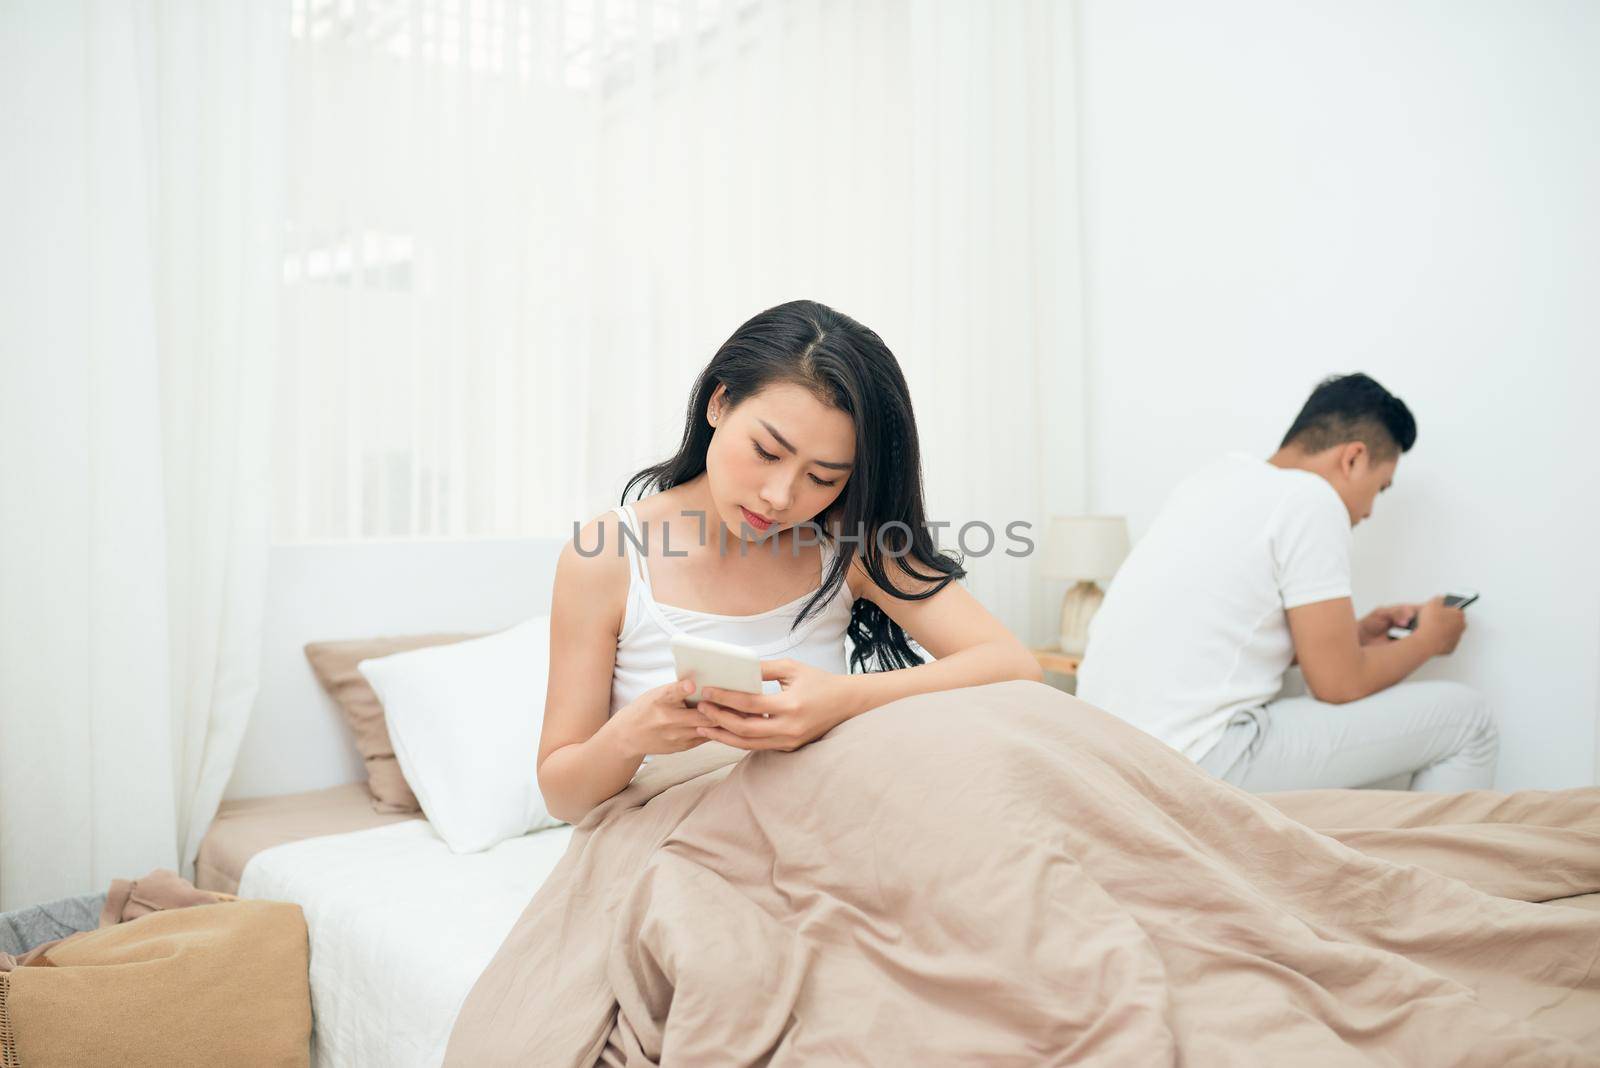 sad view of young married couple using their mobile phone in bed ignoring each other as strangers in relationship and communication problems